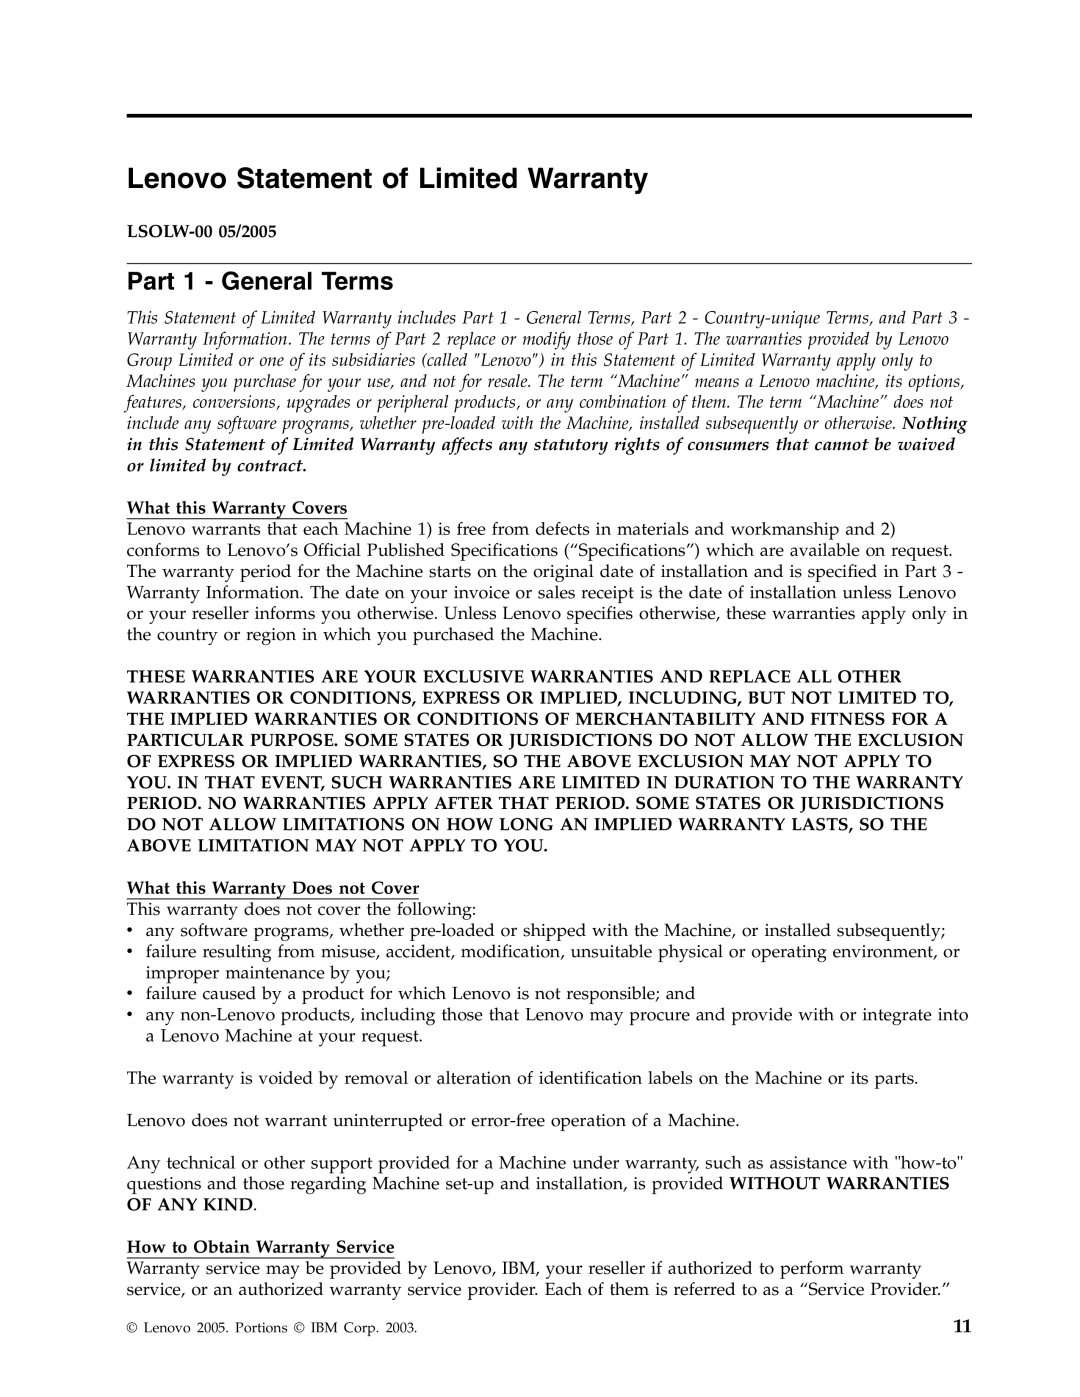 Lenovo 41N3005 Lenovo Statement of Limited Warranty, Part 1 - General Terms, LSOLW-0005/2005, What this Warranty Covers 